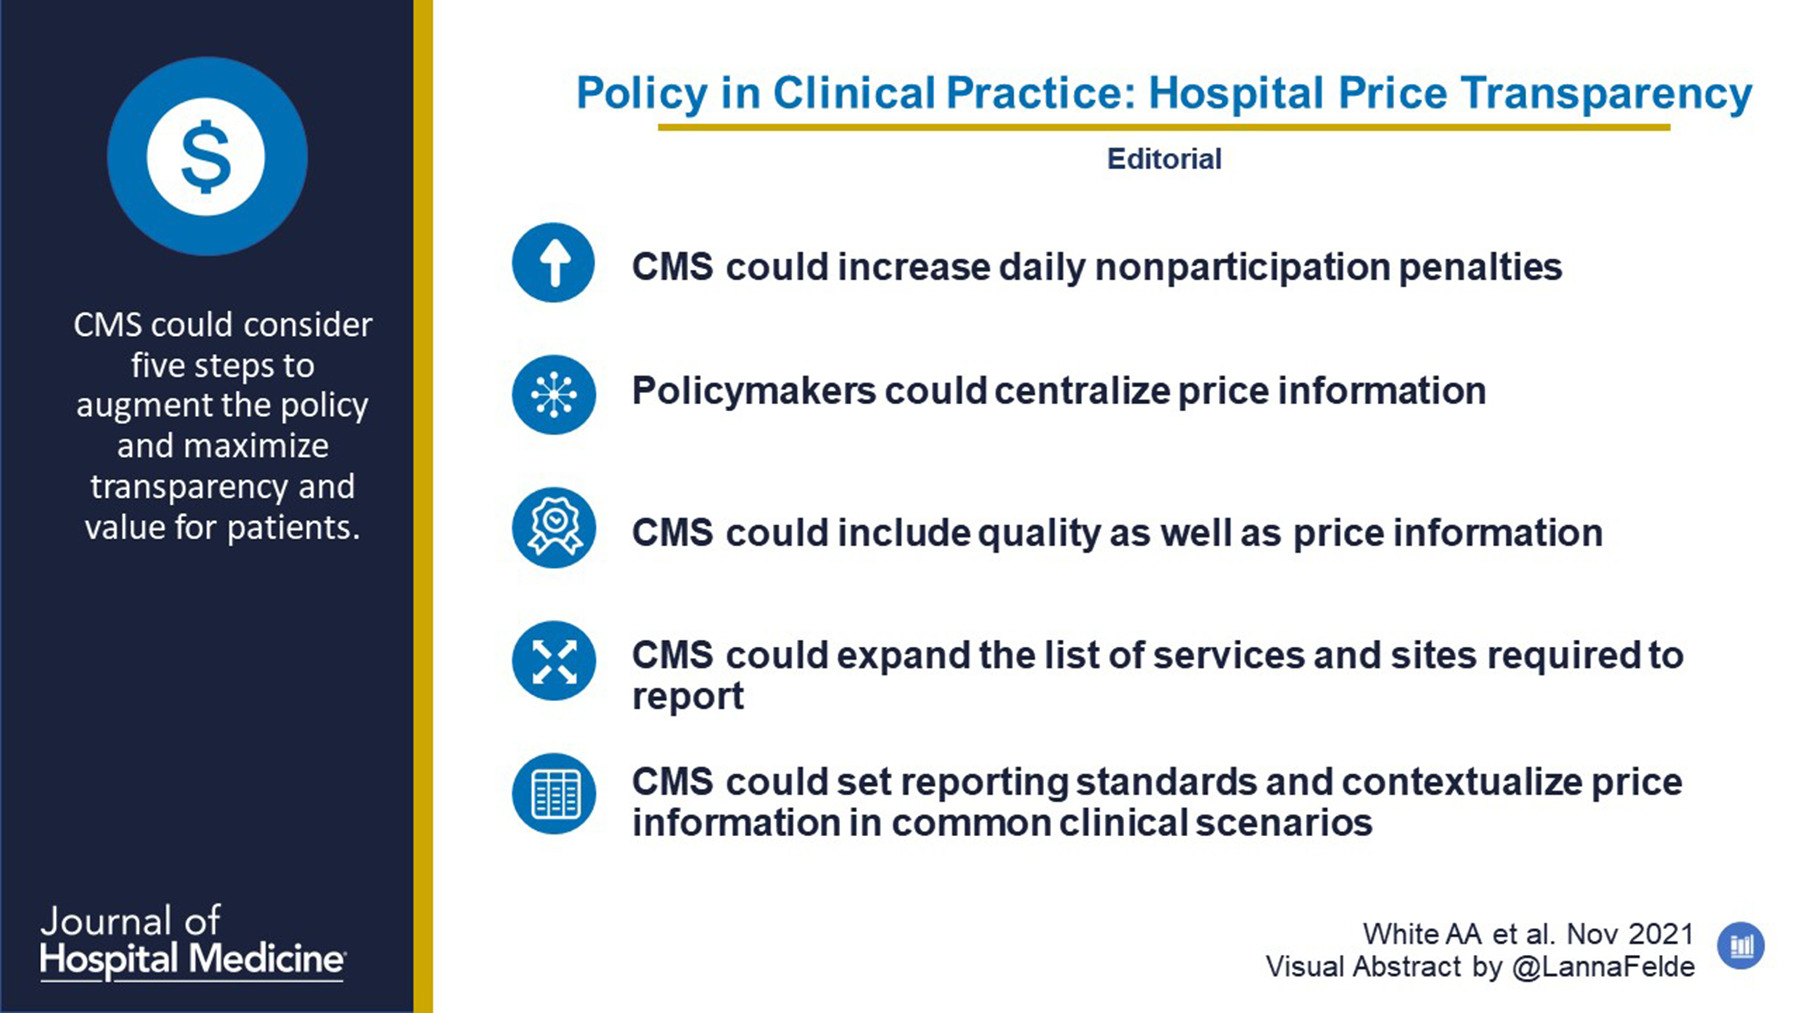 Policy in Clinical Practice: Hospital Price Transparency